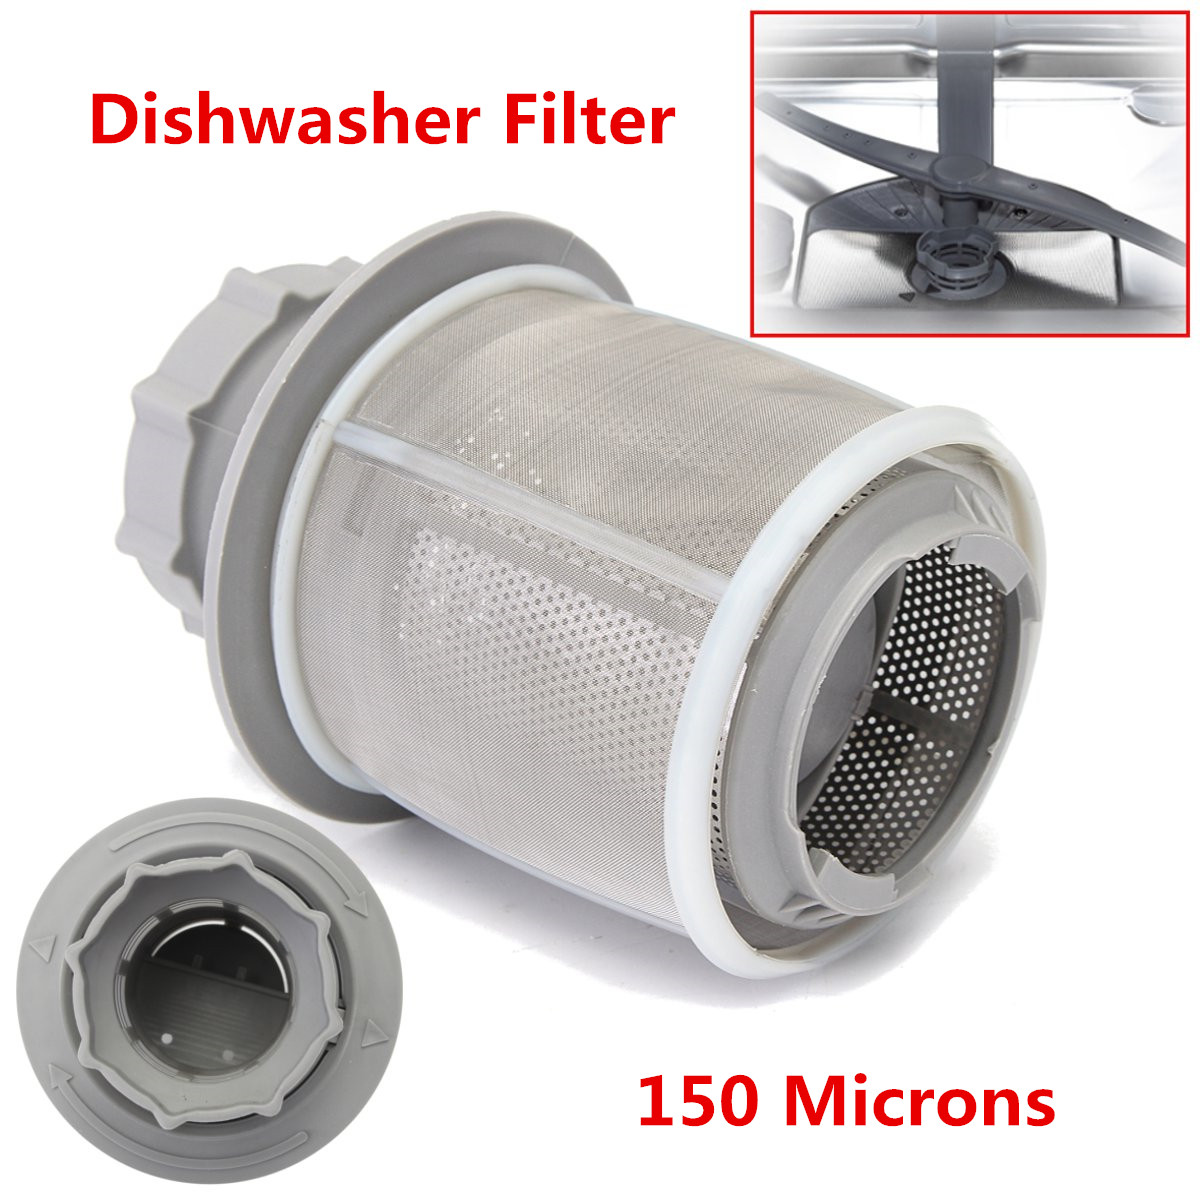 2 Part Dish Washer Mesh Filter Set Grey PP Dishwasher For BOSCH 427903 170740 Series Replacement 11